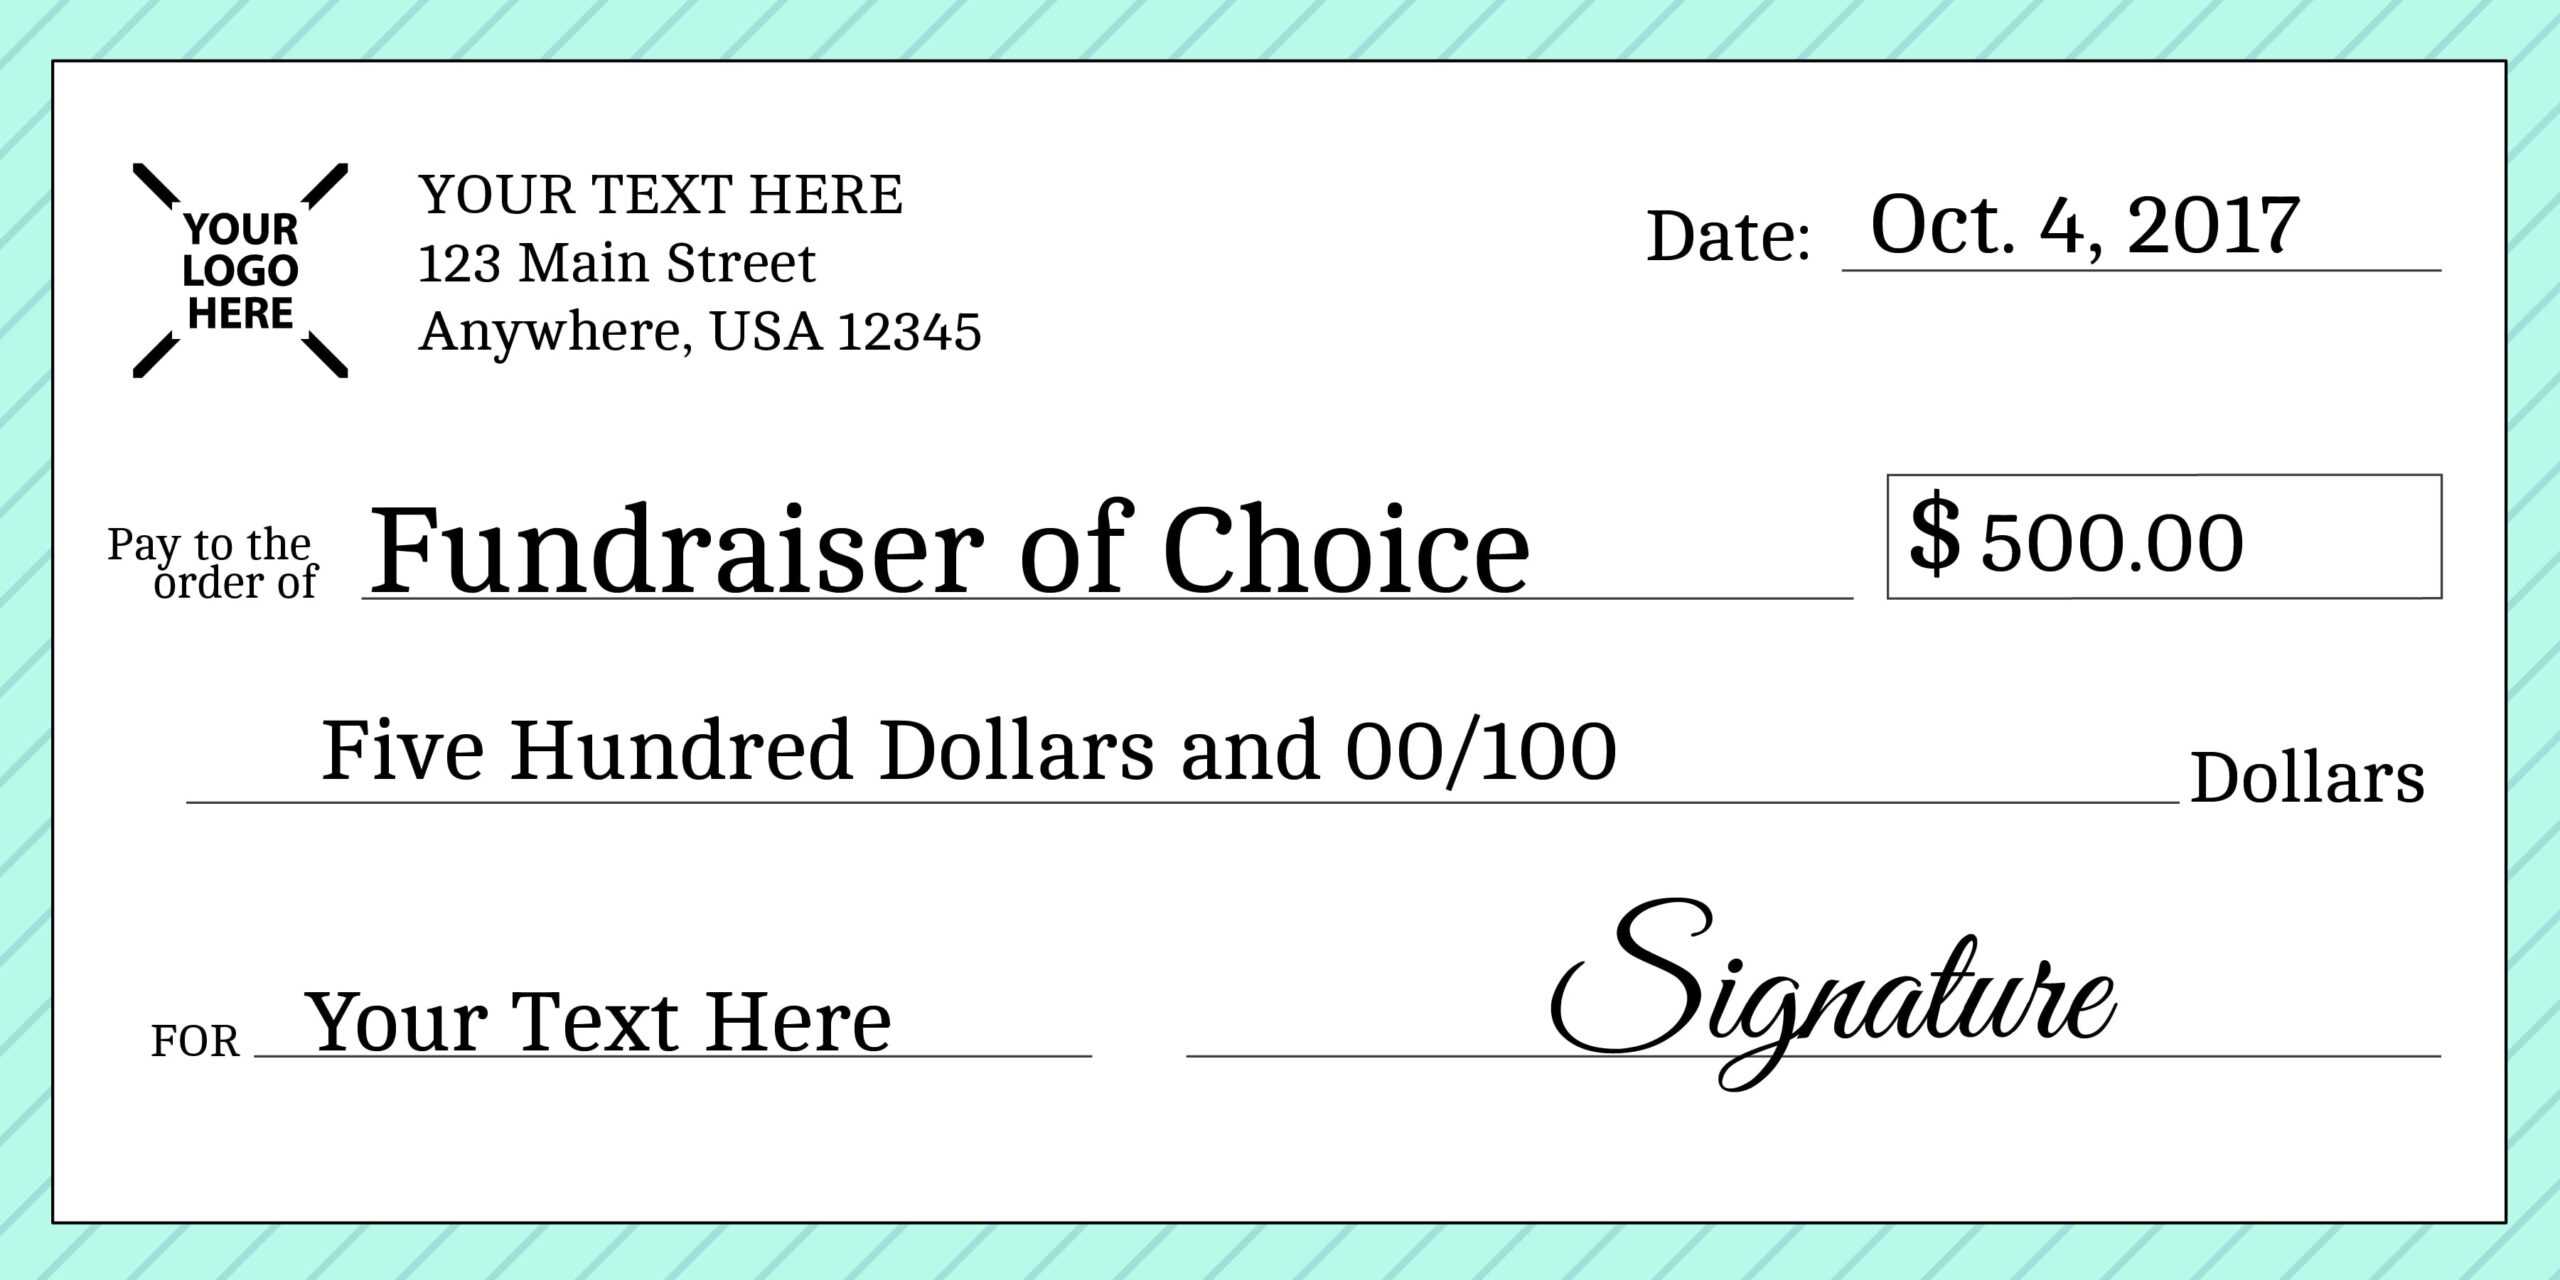 Signage 101 - Giant Check Uses And Templates | Signs Blog With Regard To Customizable Blank Check Template